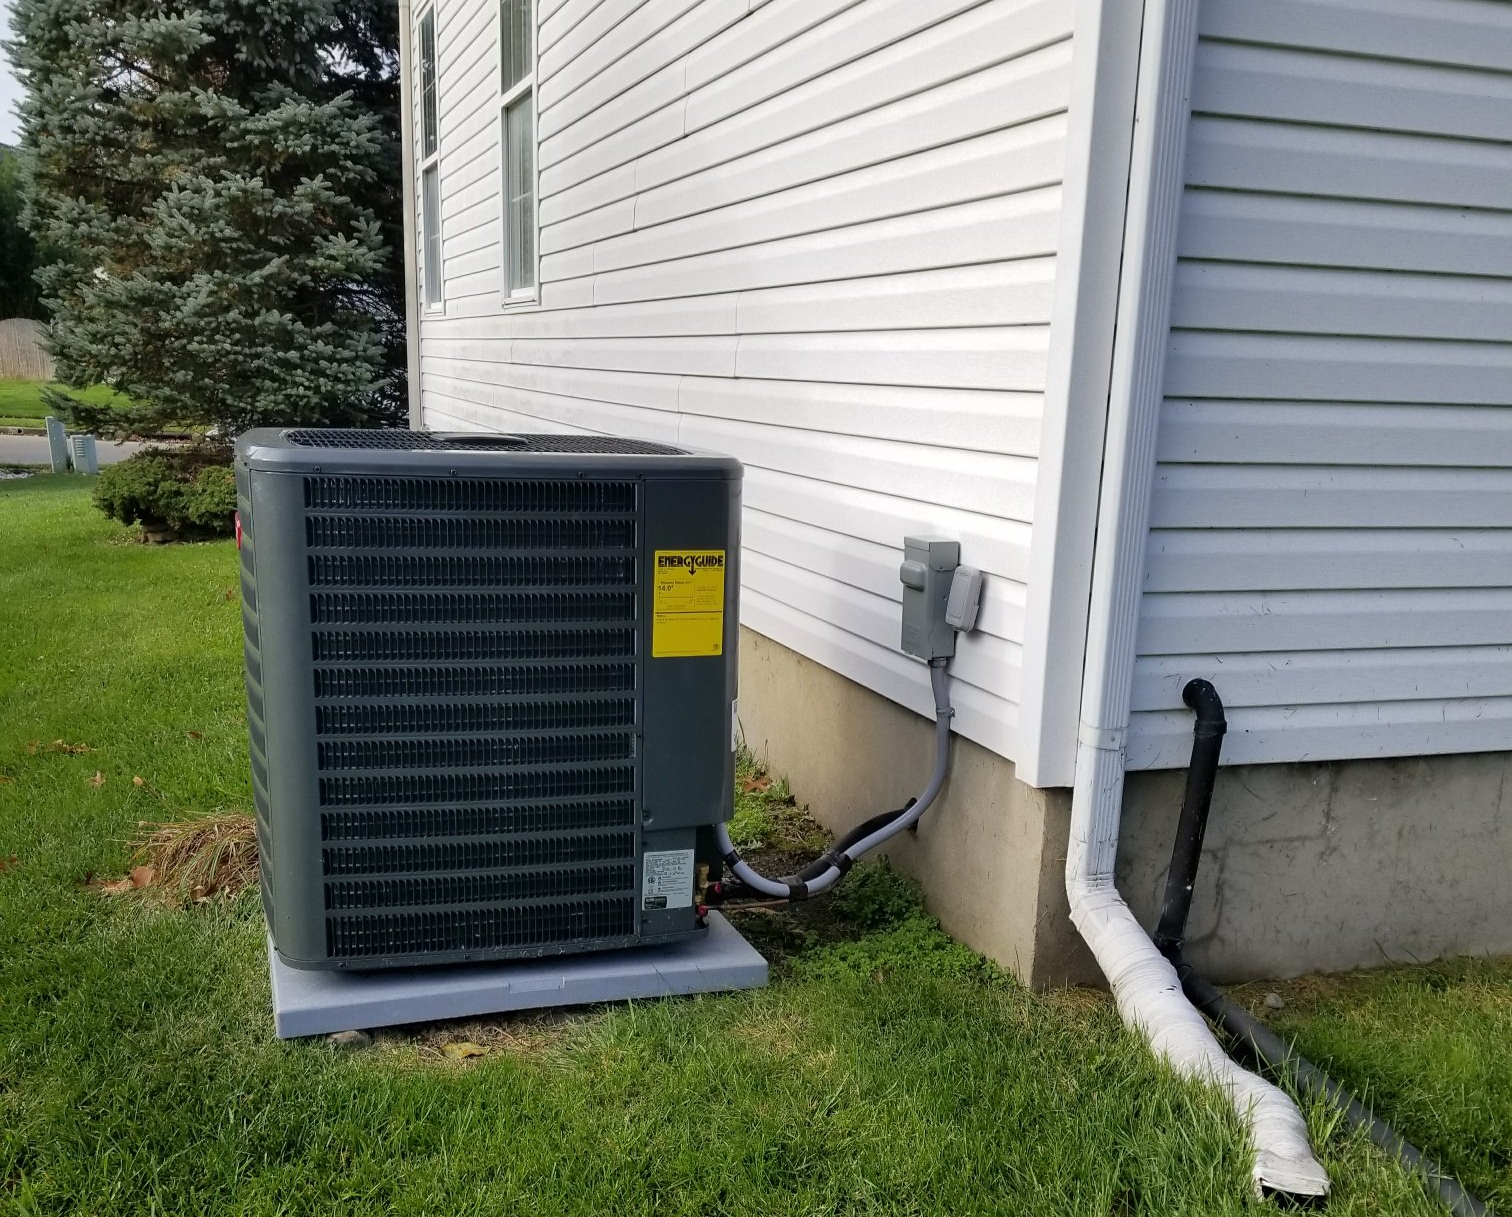 Outdoor Air Conditioning unit next to a house